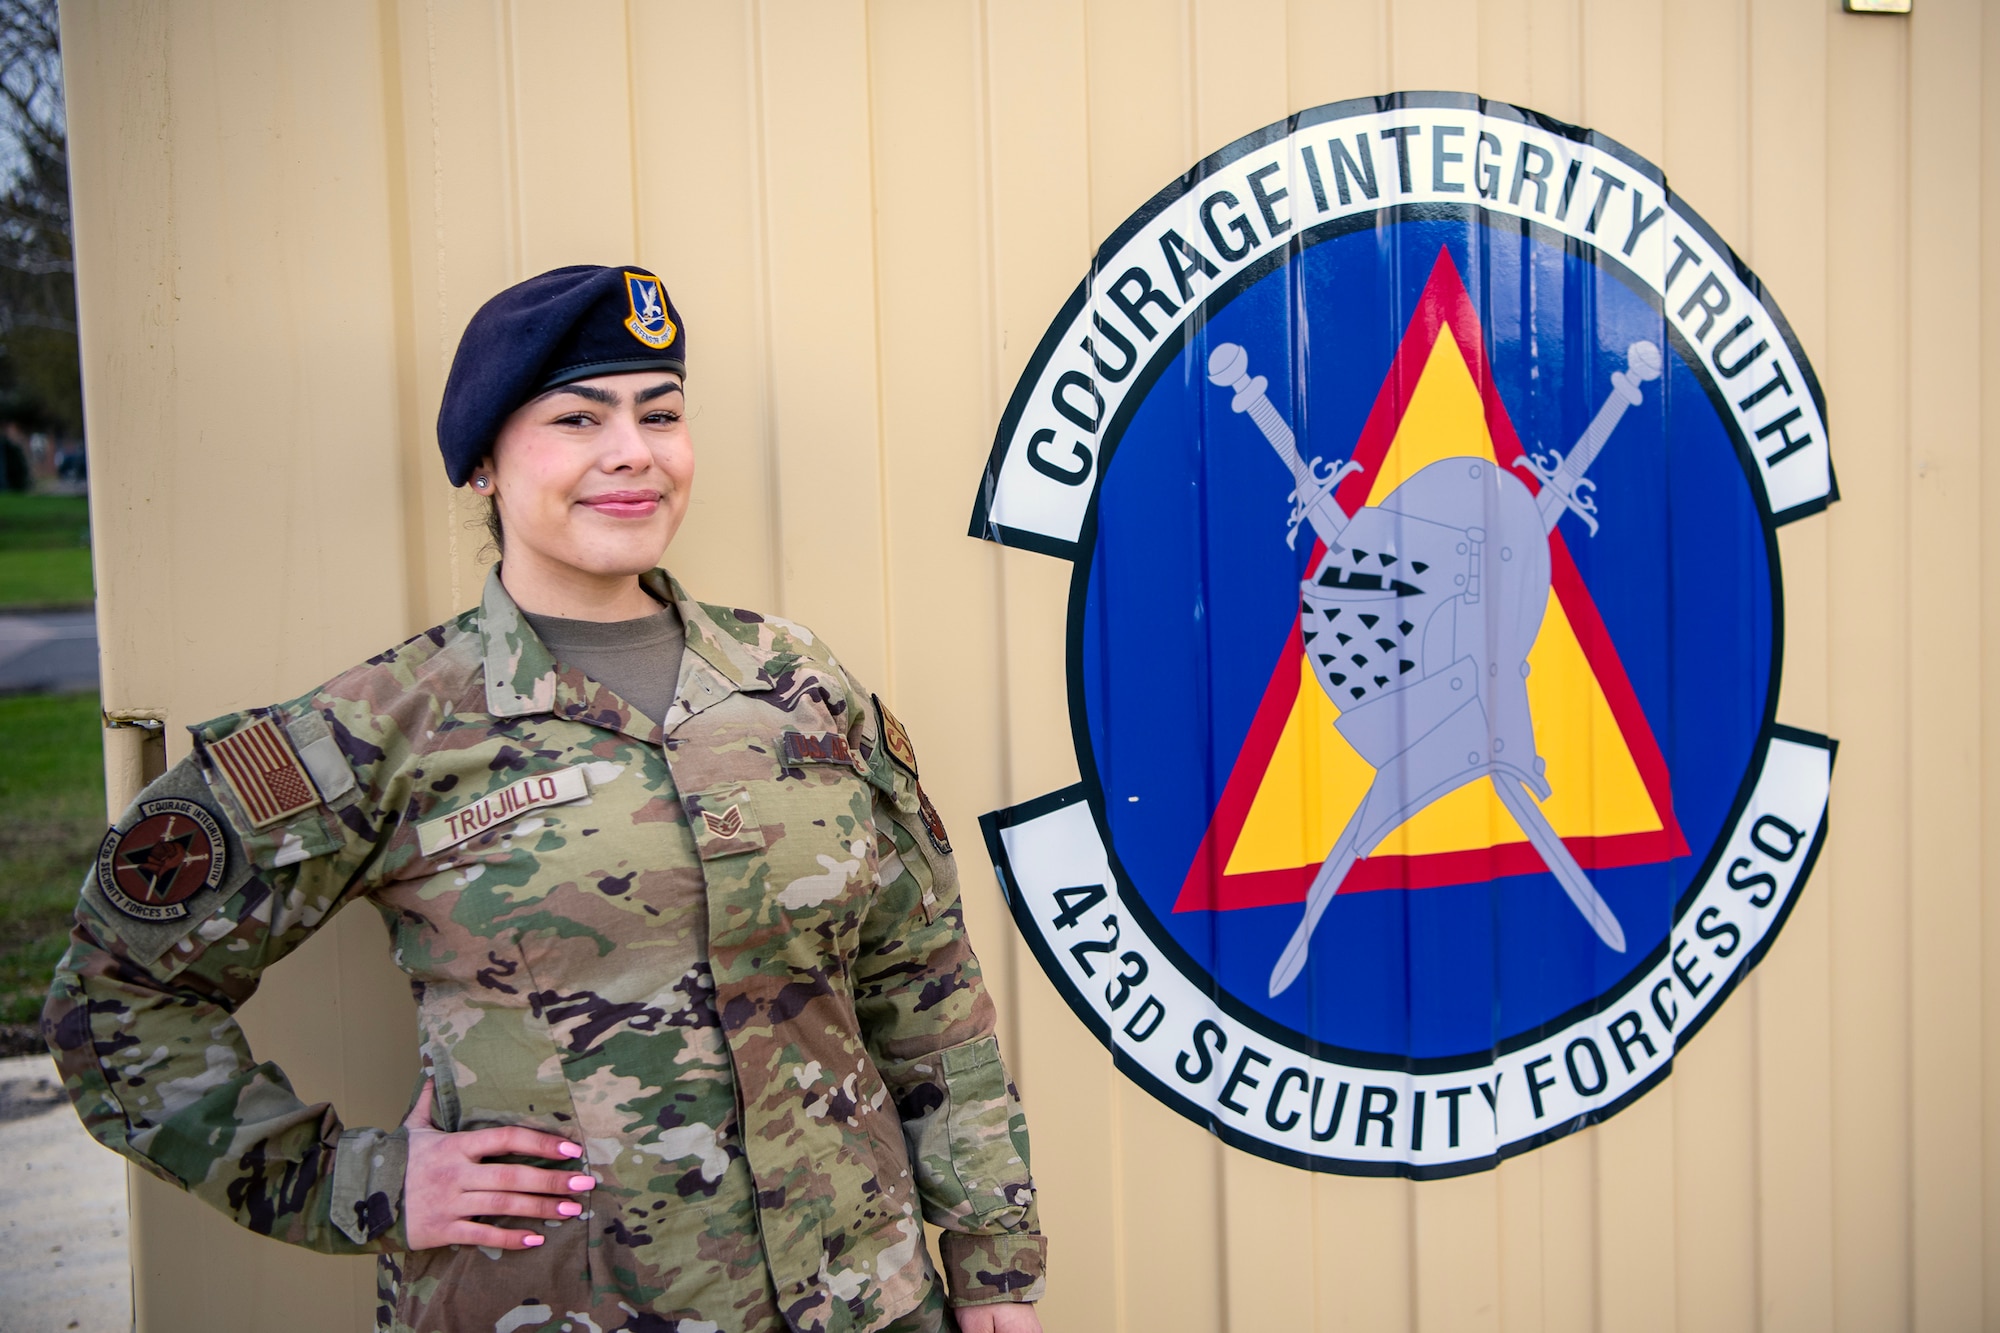 Staff Sgt. Arianna Ysabel Trujillo, 423d Security Forces Squadron flight sergeant, poses for a photo at RAF Alconbury, England. This photo is part of a project to highlight female Airmen from across the wing in honor of Women's History Month. (U.S. Air Force photo by Staff Sgt. Eugene Oliver)